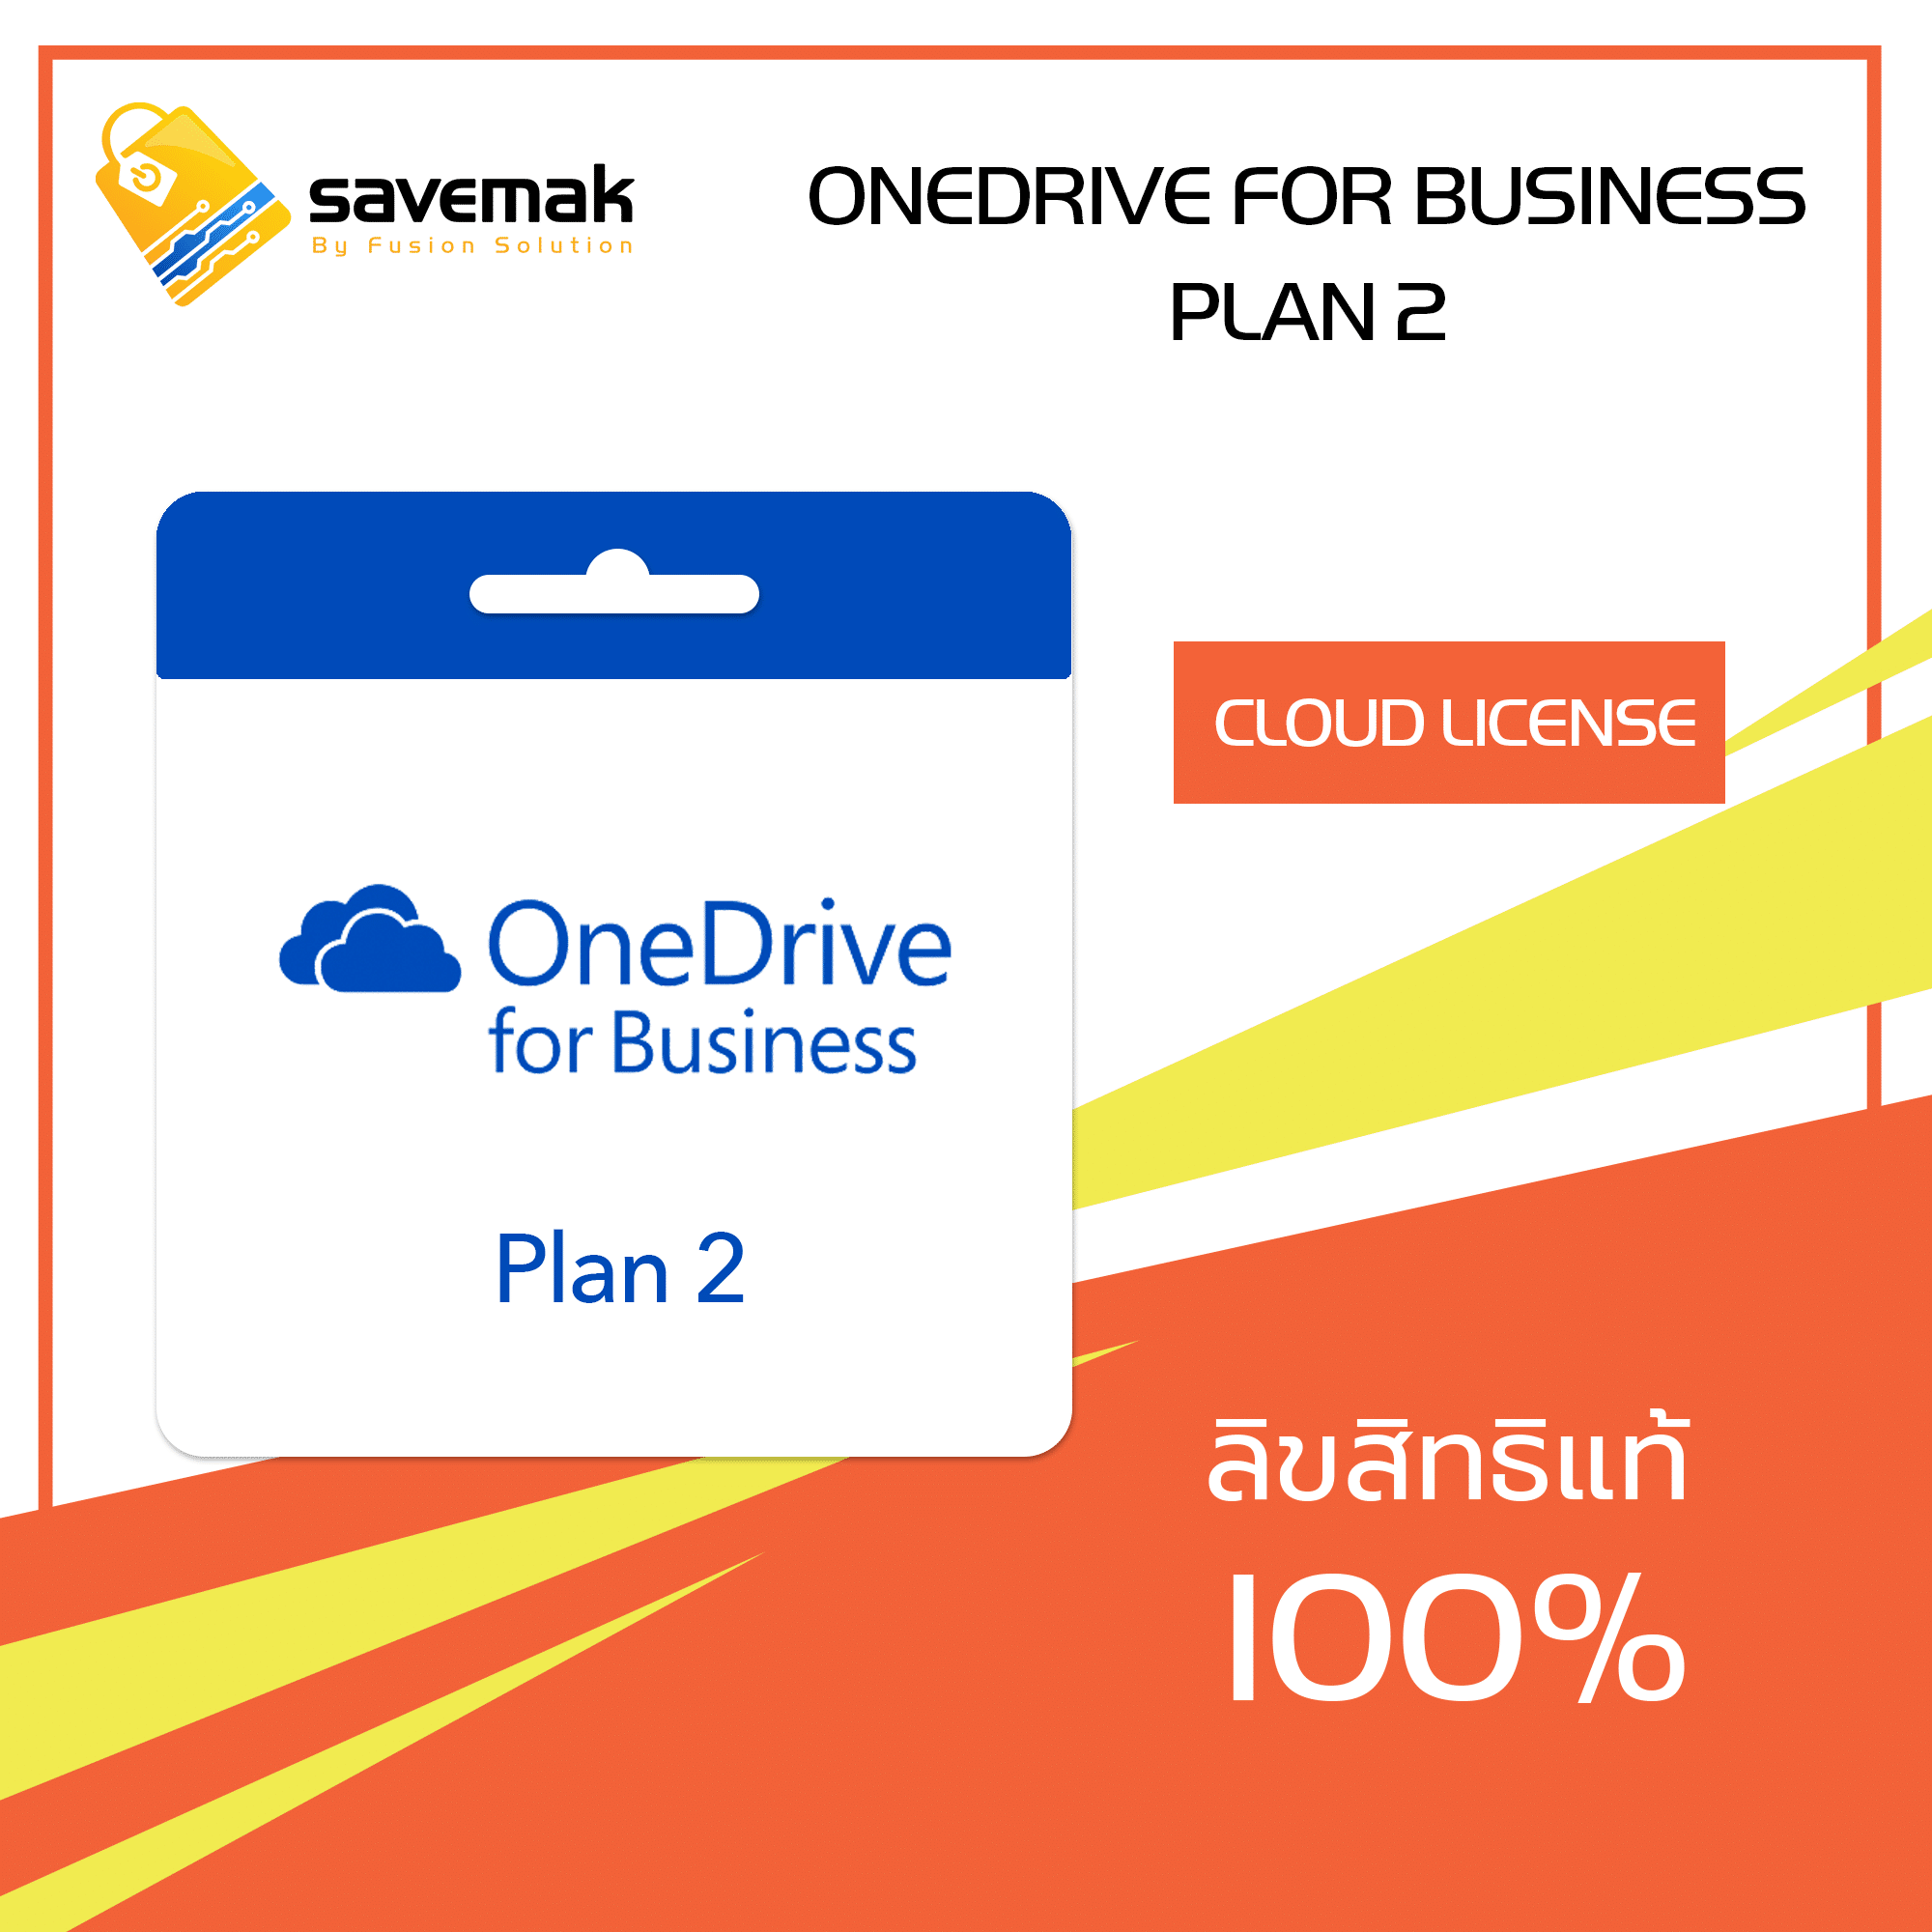 onedrive for business plan 2 minimum users